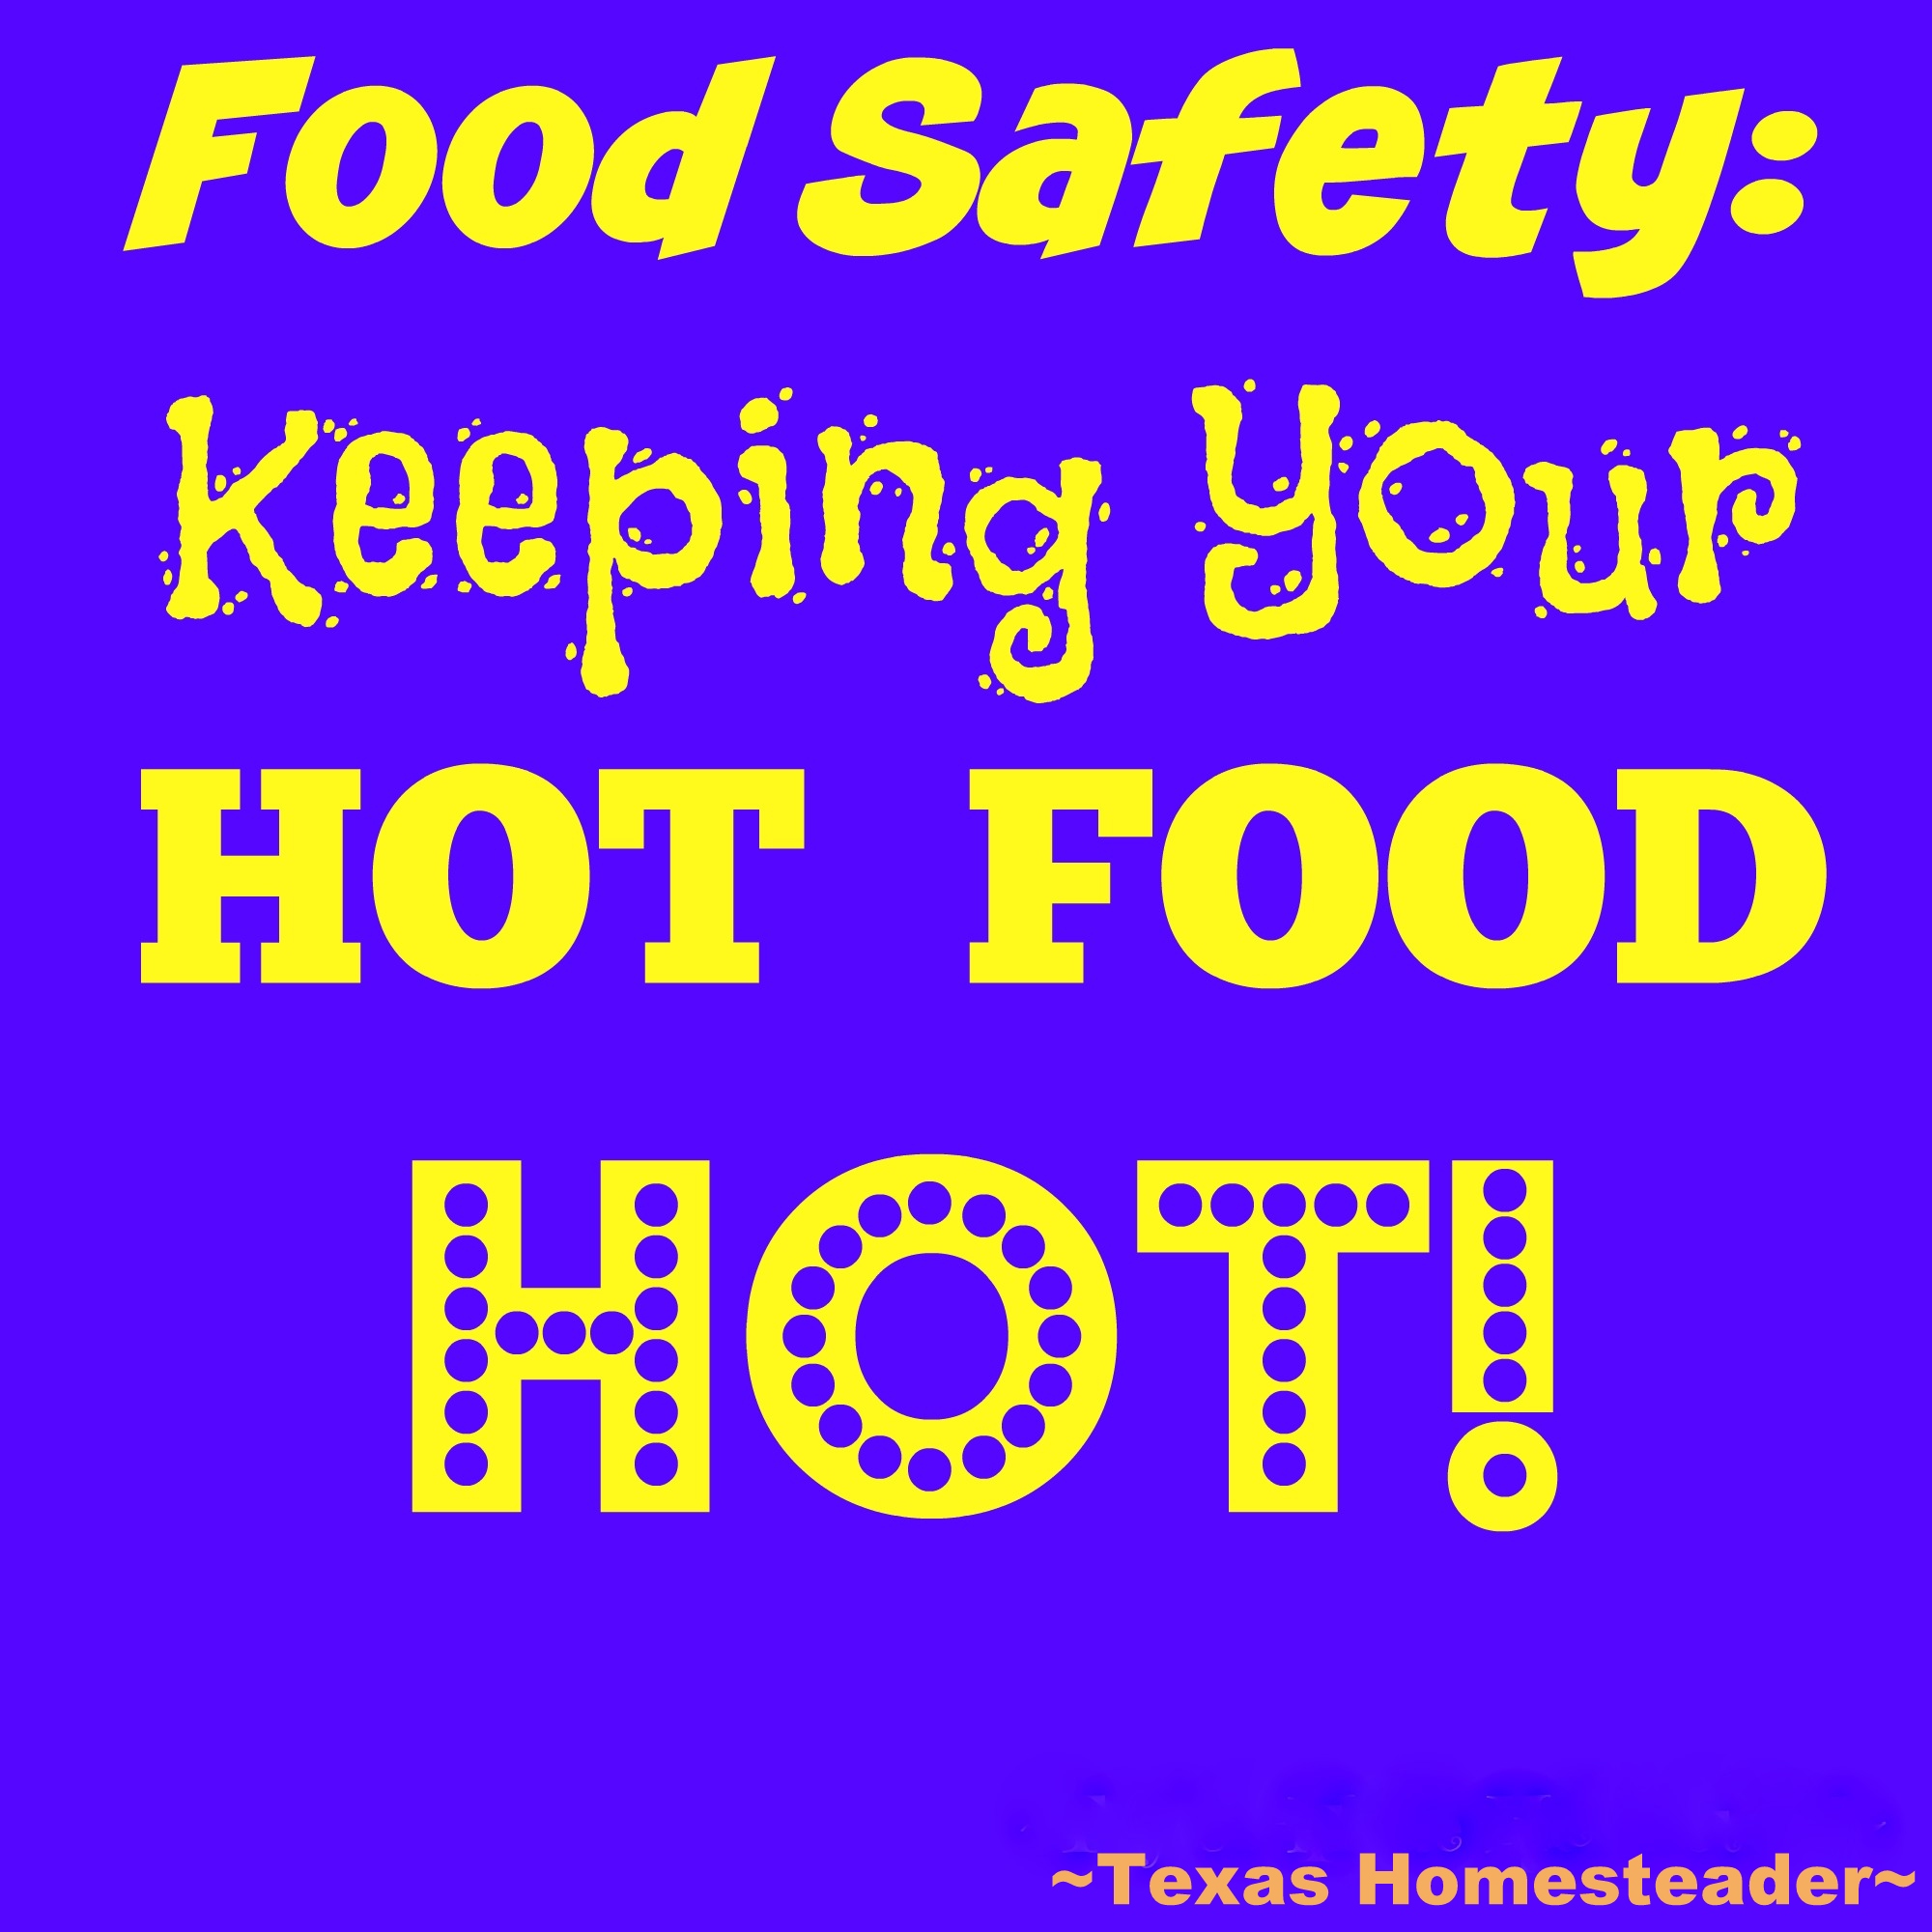 MAKE SURE YOUR HOT FOOD STAYS HOT - Food safety is important! See how we keep that casserole hot during transit and before the big meal. #TexasHomesteader